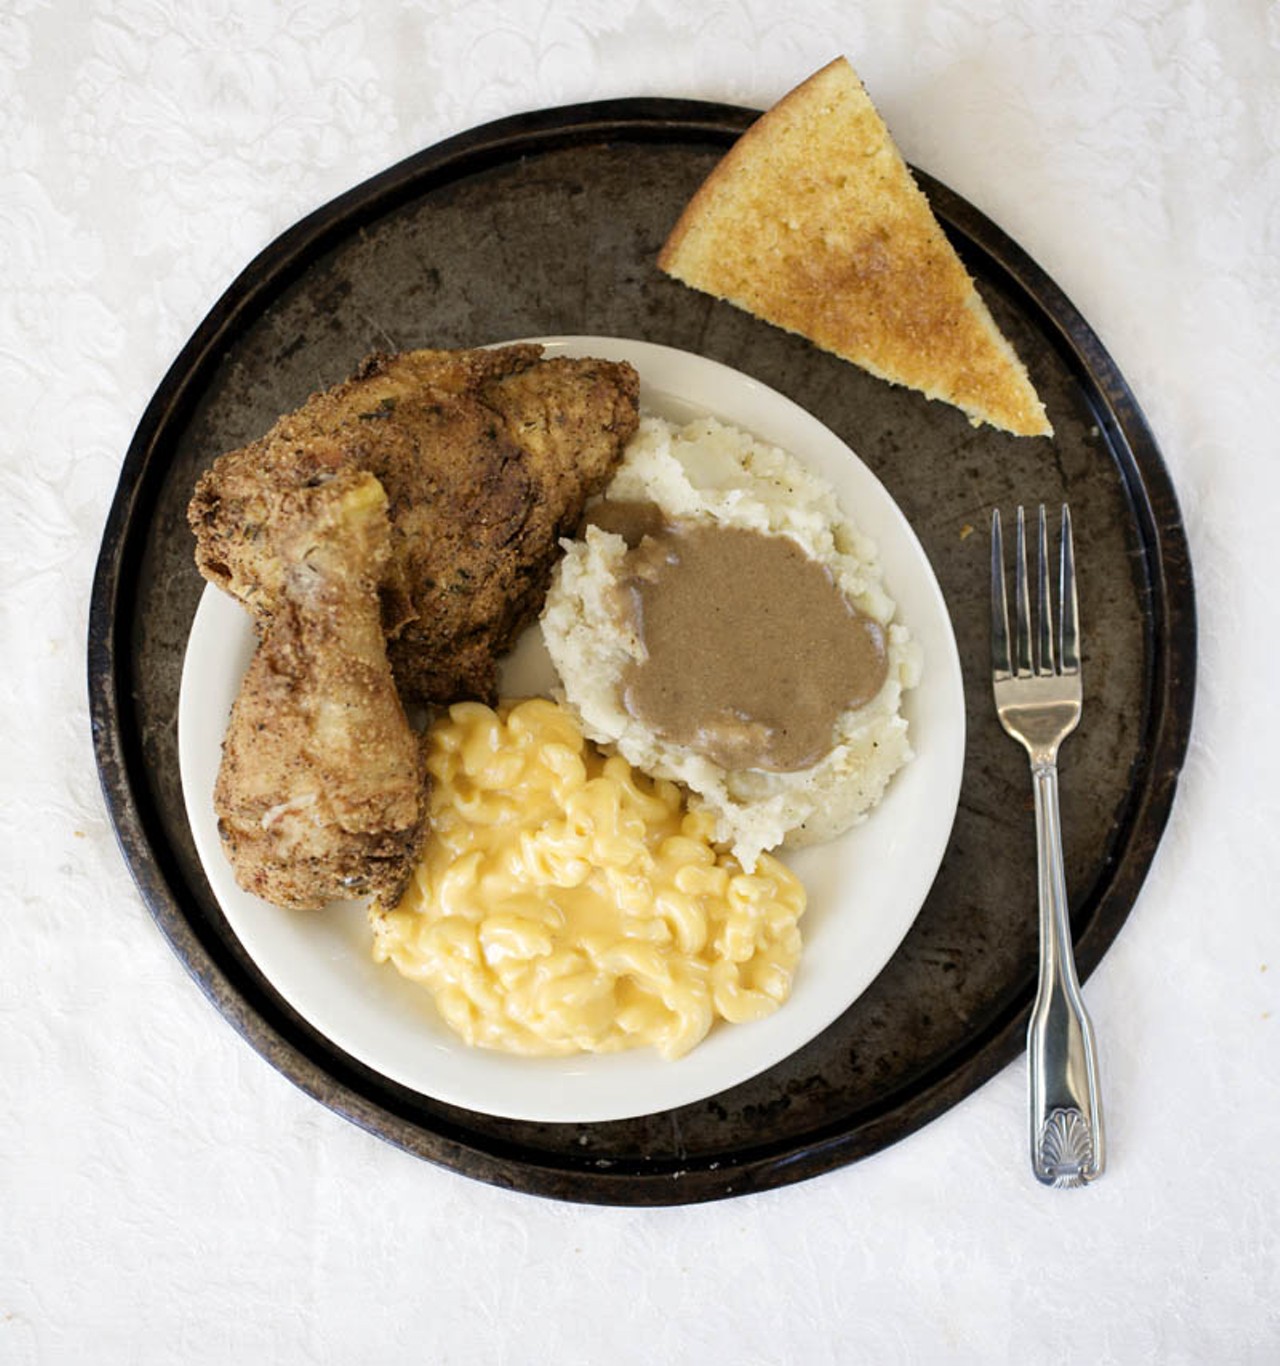 The chicken entree and Mama Josephine's is fried chicken, of course, and is shown here with mashed potatoes & country gravy, macaroni & cheese and a piece of corn bread fresh from the skillet.